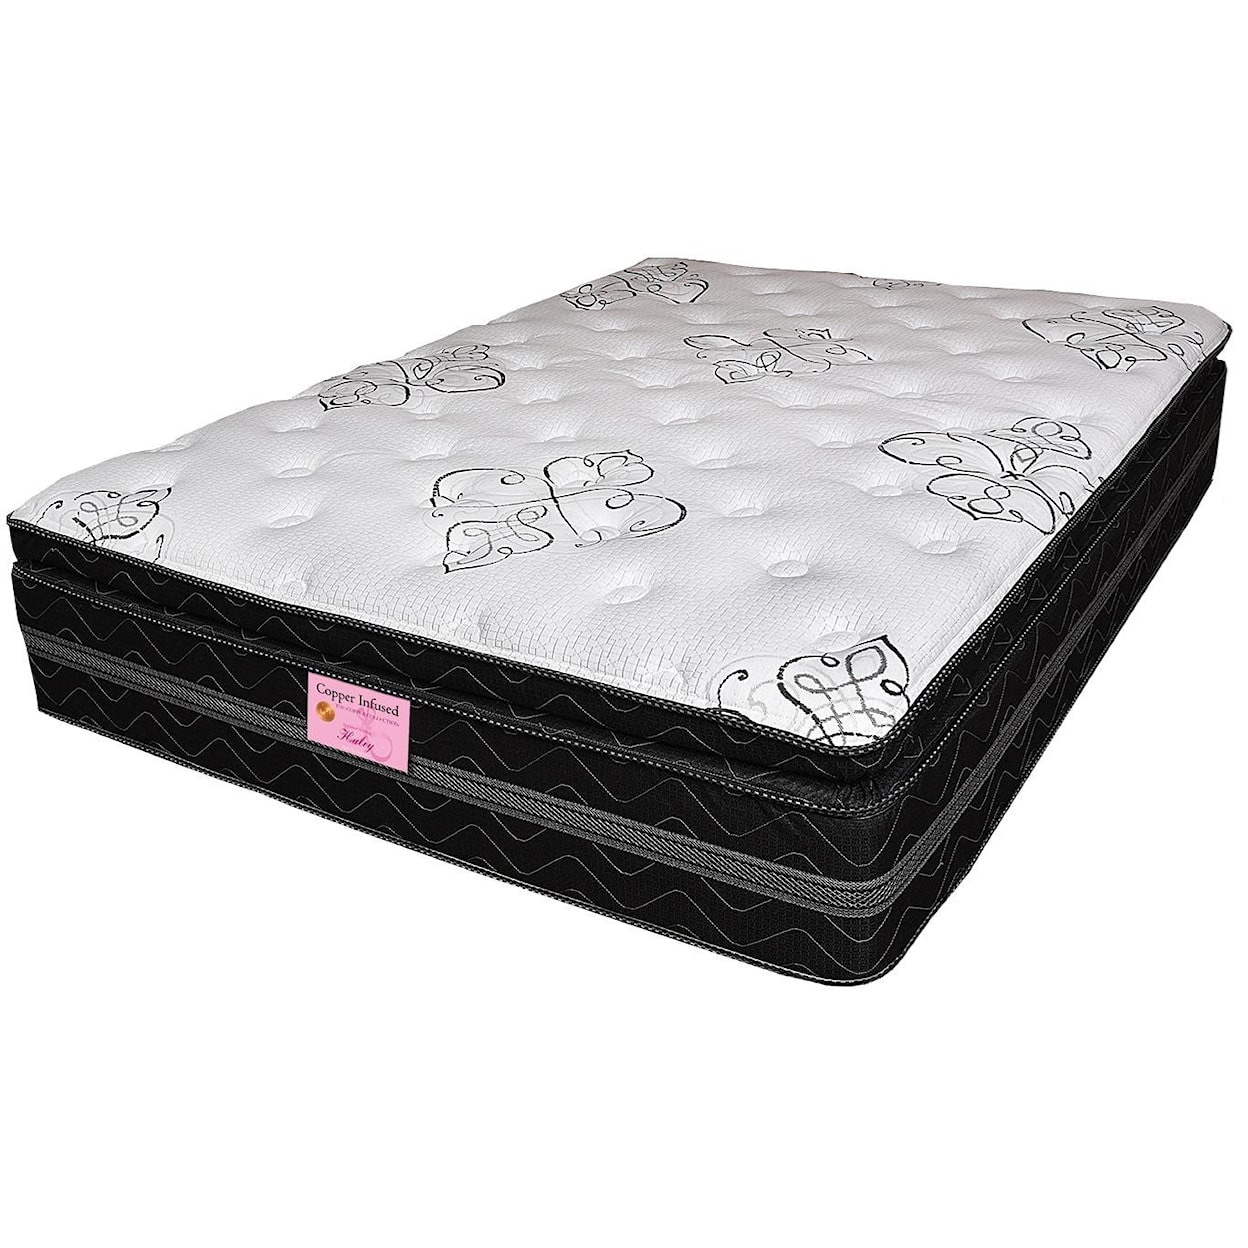 United Bedding Haley P King Pocketed Coil Mattress